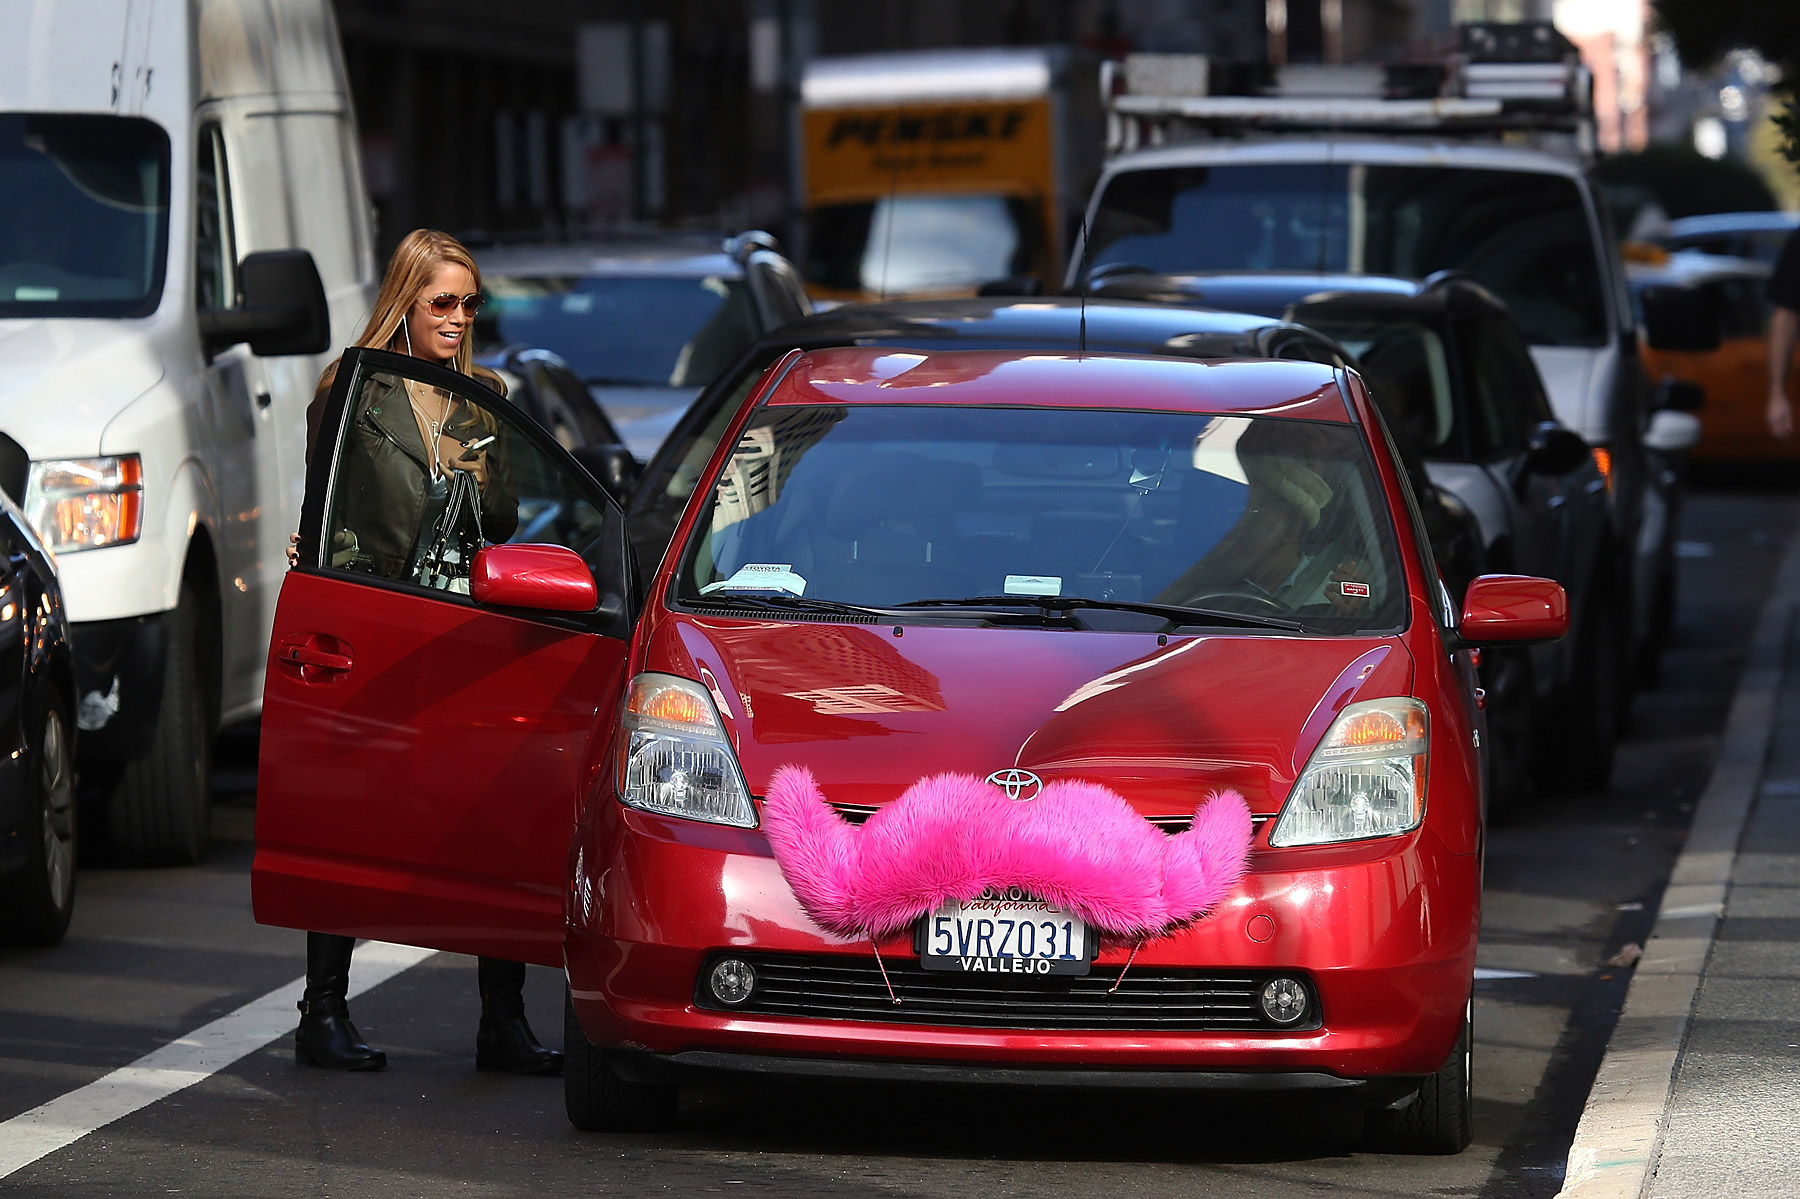 A Lyft customer gets into a car on January 21, 2014 in San Francisco, California. (Justin Sullivan&mdash;Getty Images)